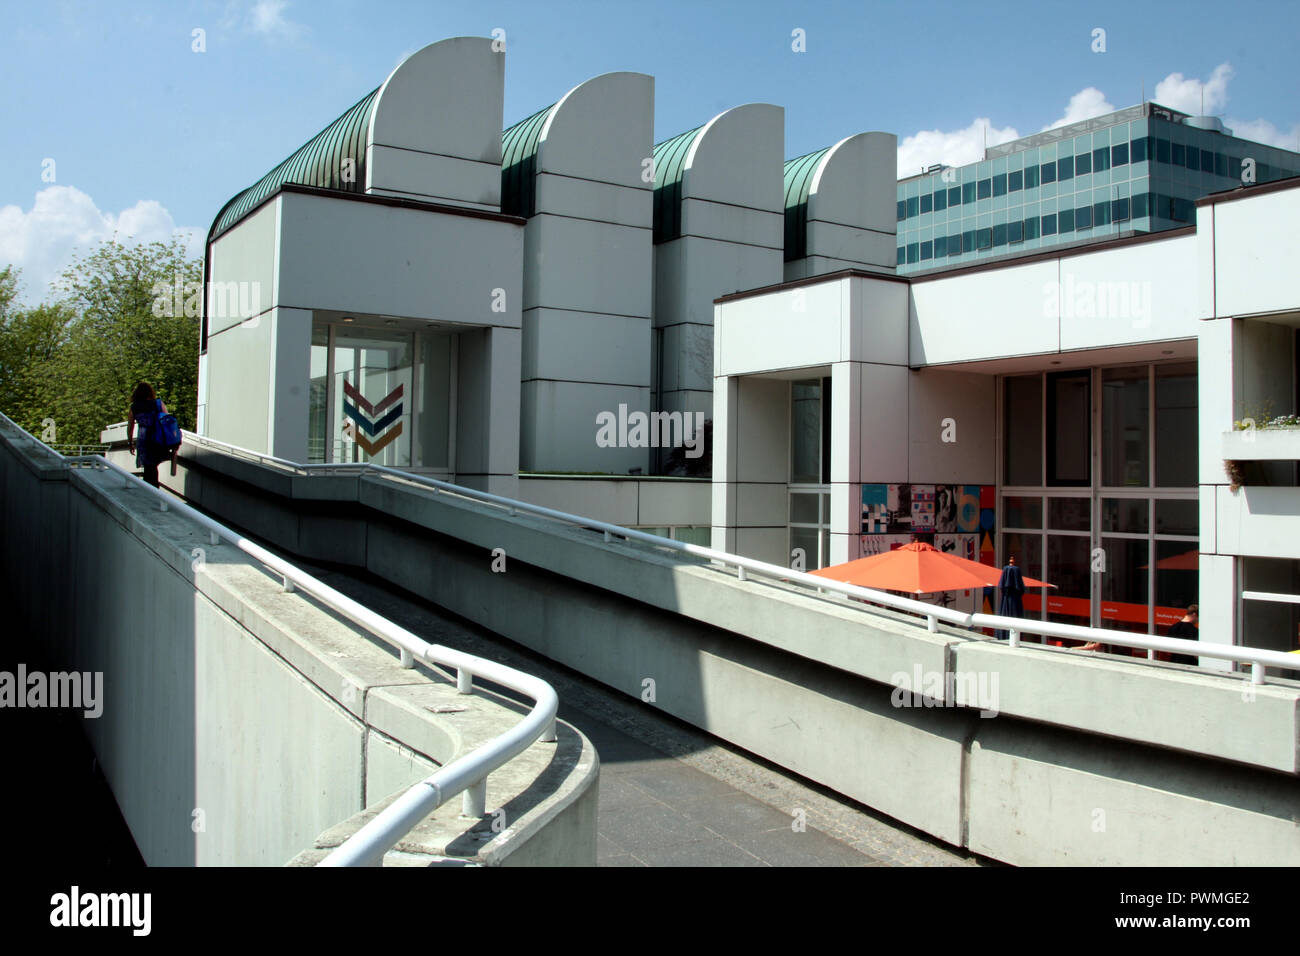 Part of the exterior to the Bauhaus-Archiv which is a museum dedicated to the Bauhaus movement of art, culture, ideas, design and thoughts that shaped Berlin and the wider world in the 20th century. Stock Photo